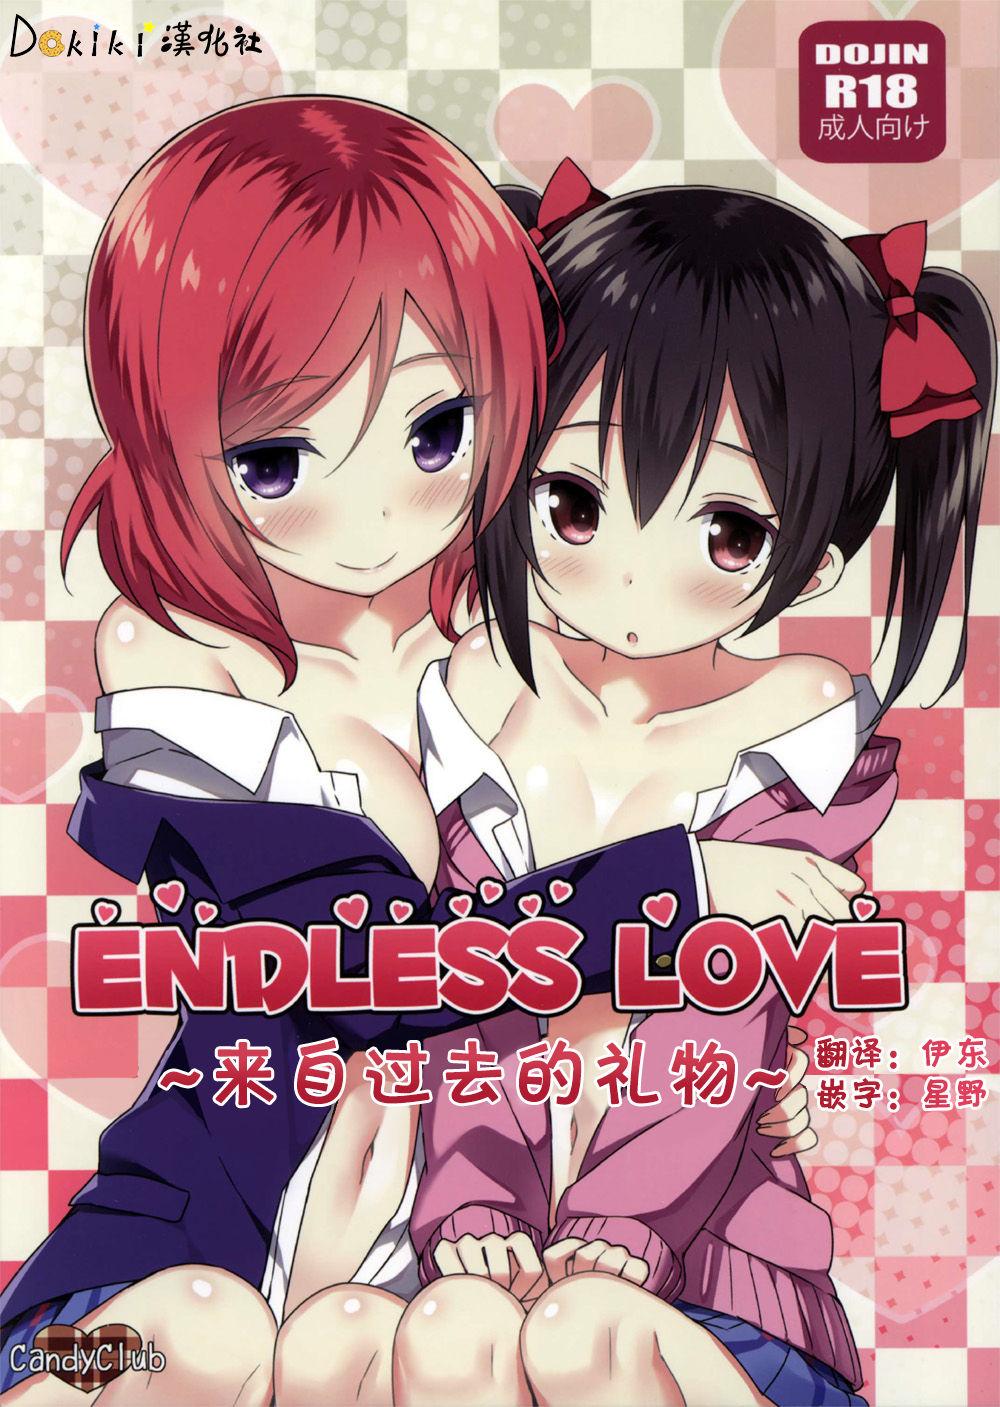 Jacking Endless Love - Love live Vietnamese - Page 1